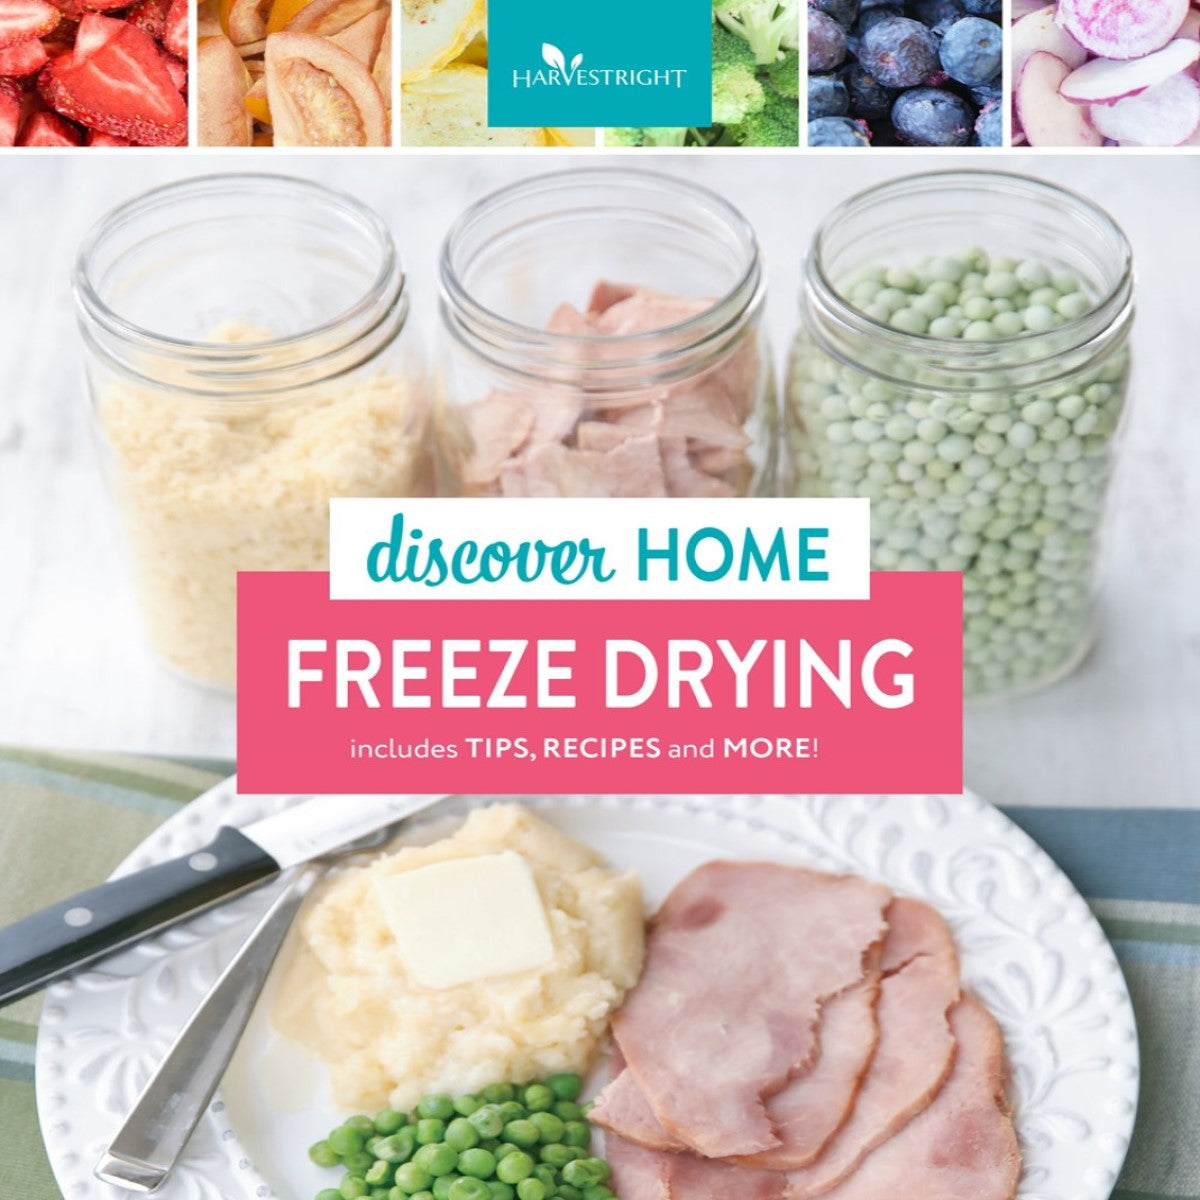 Harvest Right | Discover Home Freeze Drying Hardback Recipe Book